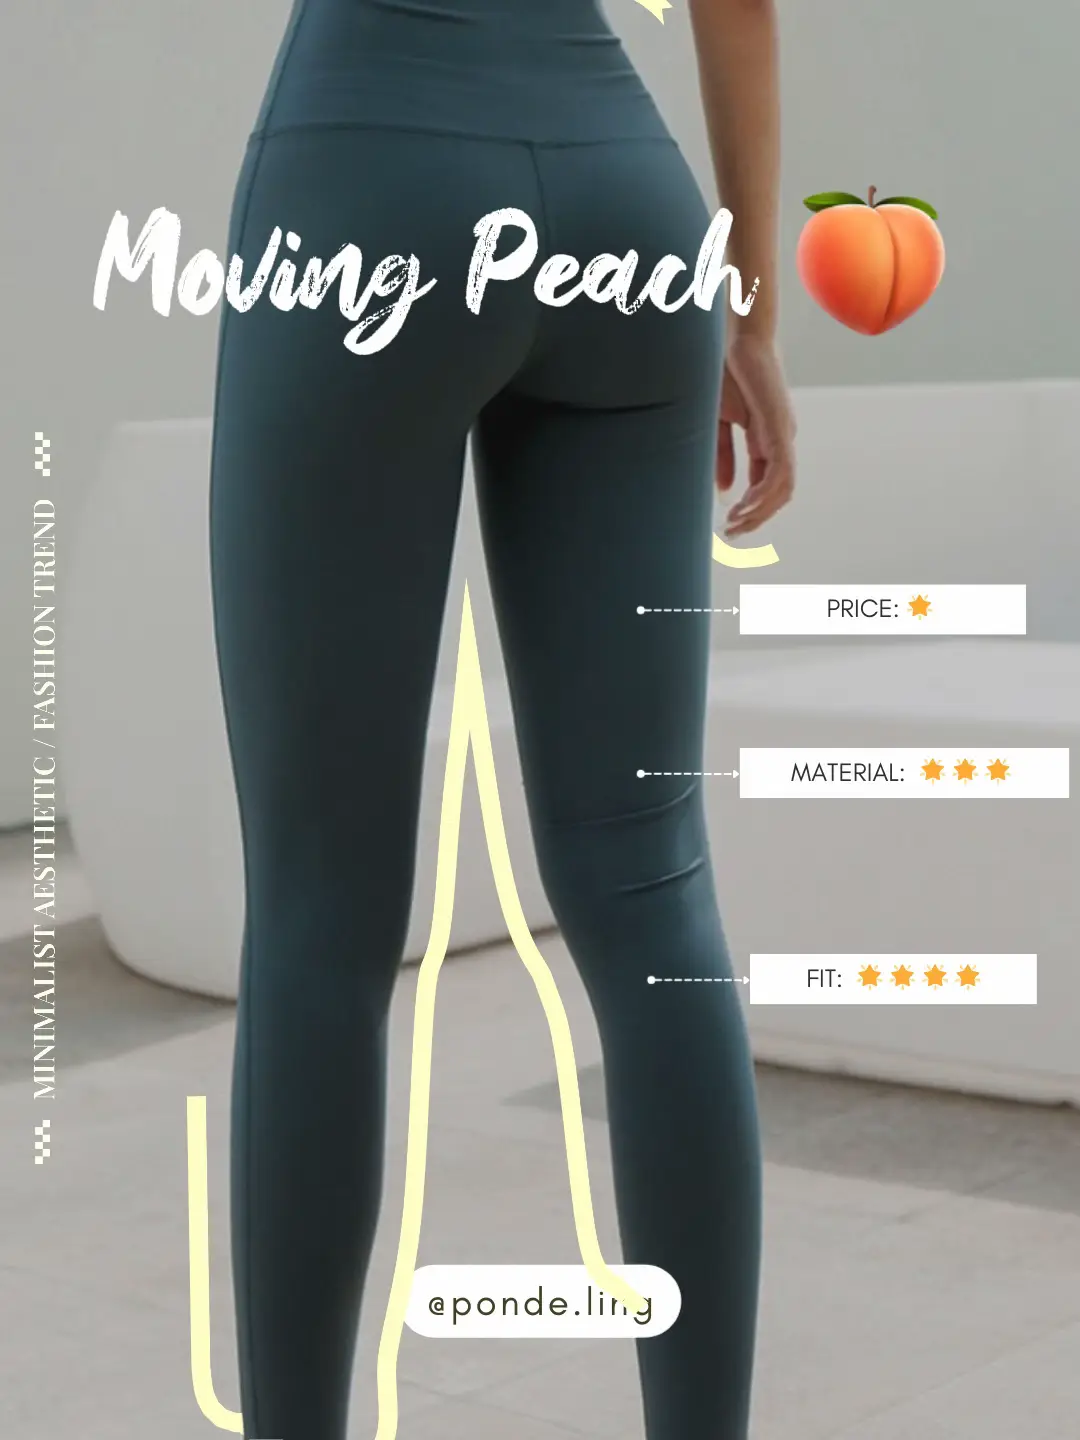 AFFORDABLE LULULEMON LEGGING DUPES?!, Gallery posted by ling